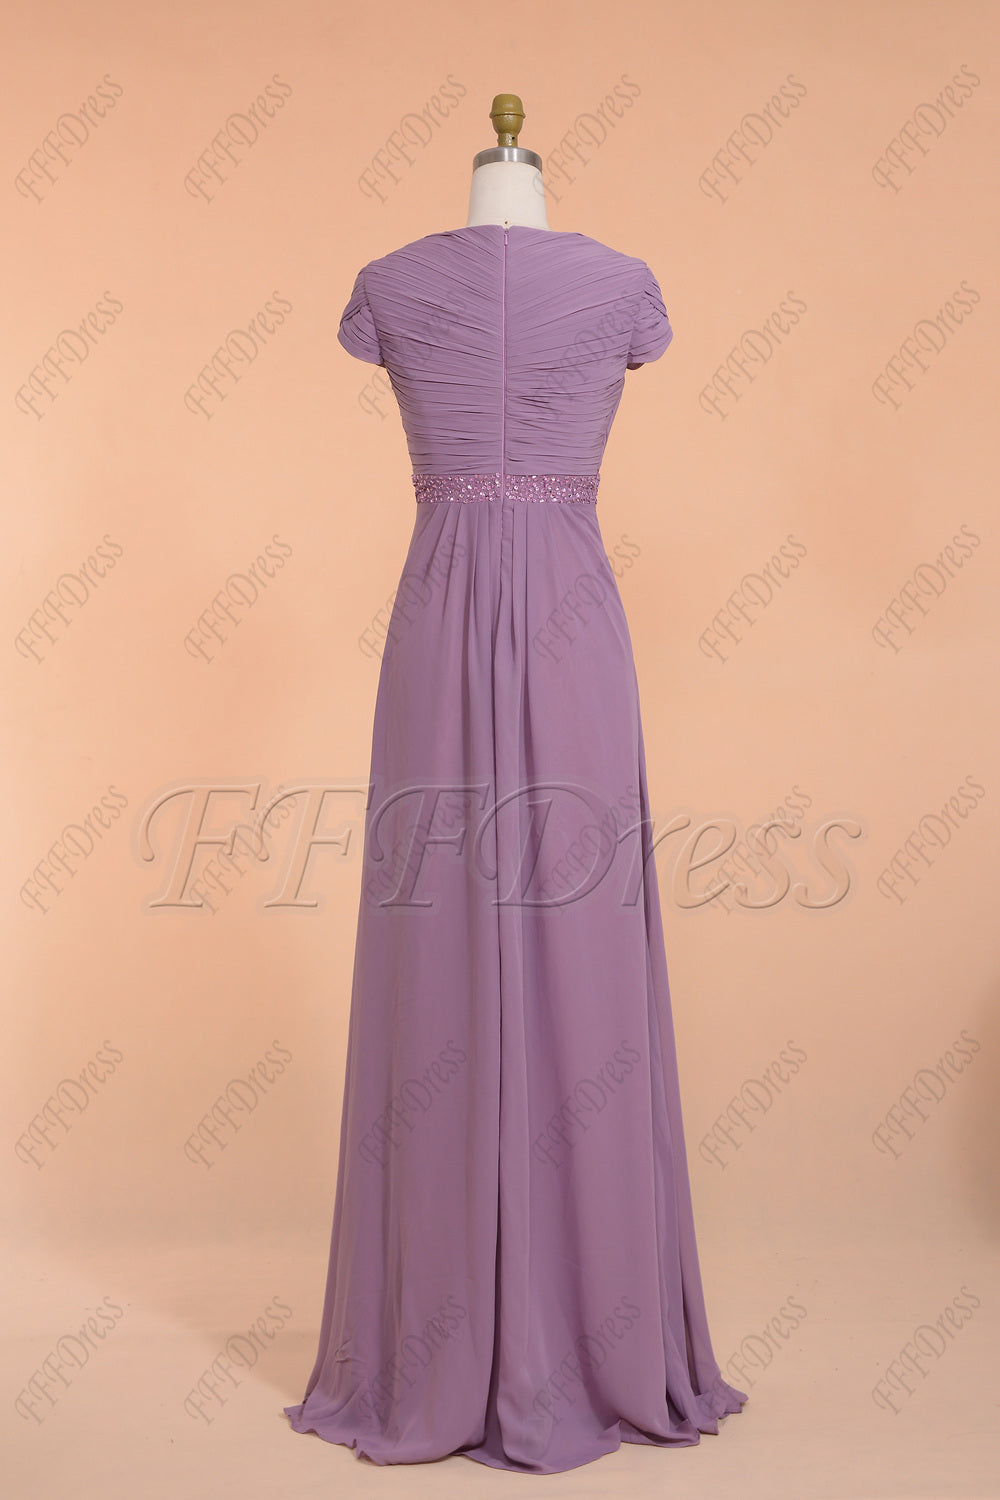 Modest Wisteria bridesmaid dresses with short sleeves